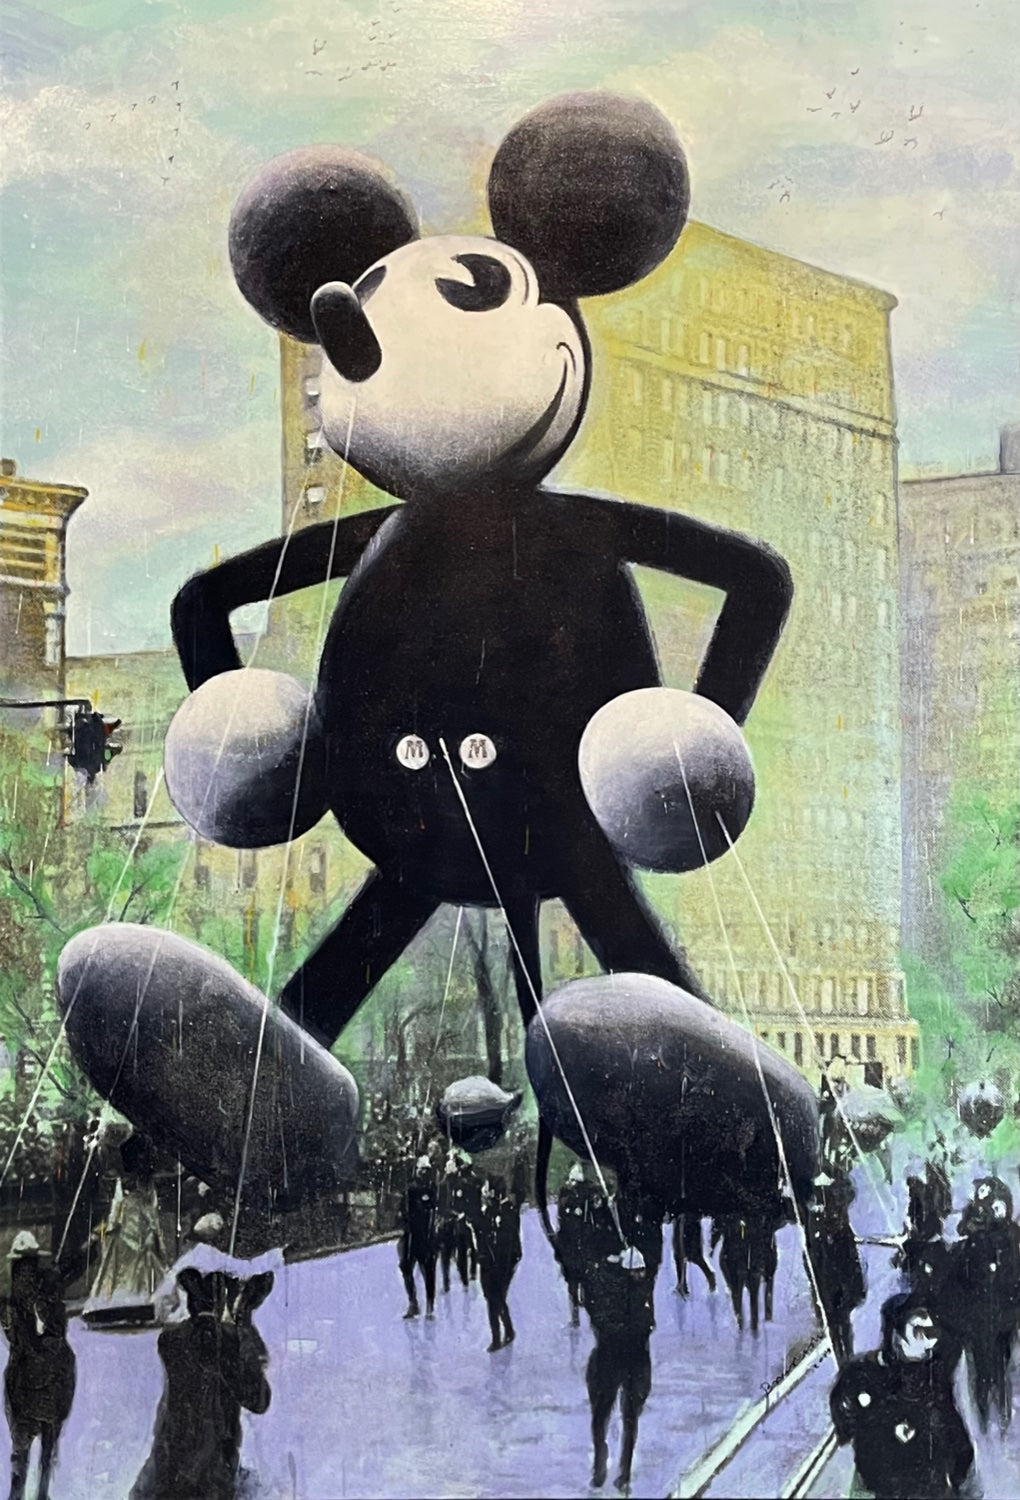 Bruce Helander  Macy's Mickey Mouse, ca. 1934 (Purple & Green), 2019  Acrylic embellished with Glitter and Spray Paint on canvas  79 x 54 inches  Macy’s Mickey Mouse celebrates that historic first appearance in the annual Macy’s Thanksgiving Day Parade in Manhattan. In this composition numerous crew members (with MM hats) hang on for dear life during an early morning unexpected windstorm that almost sent Mickey to the heavens. Available at Manolis Projects Gallery, Miami, FL